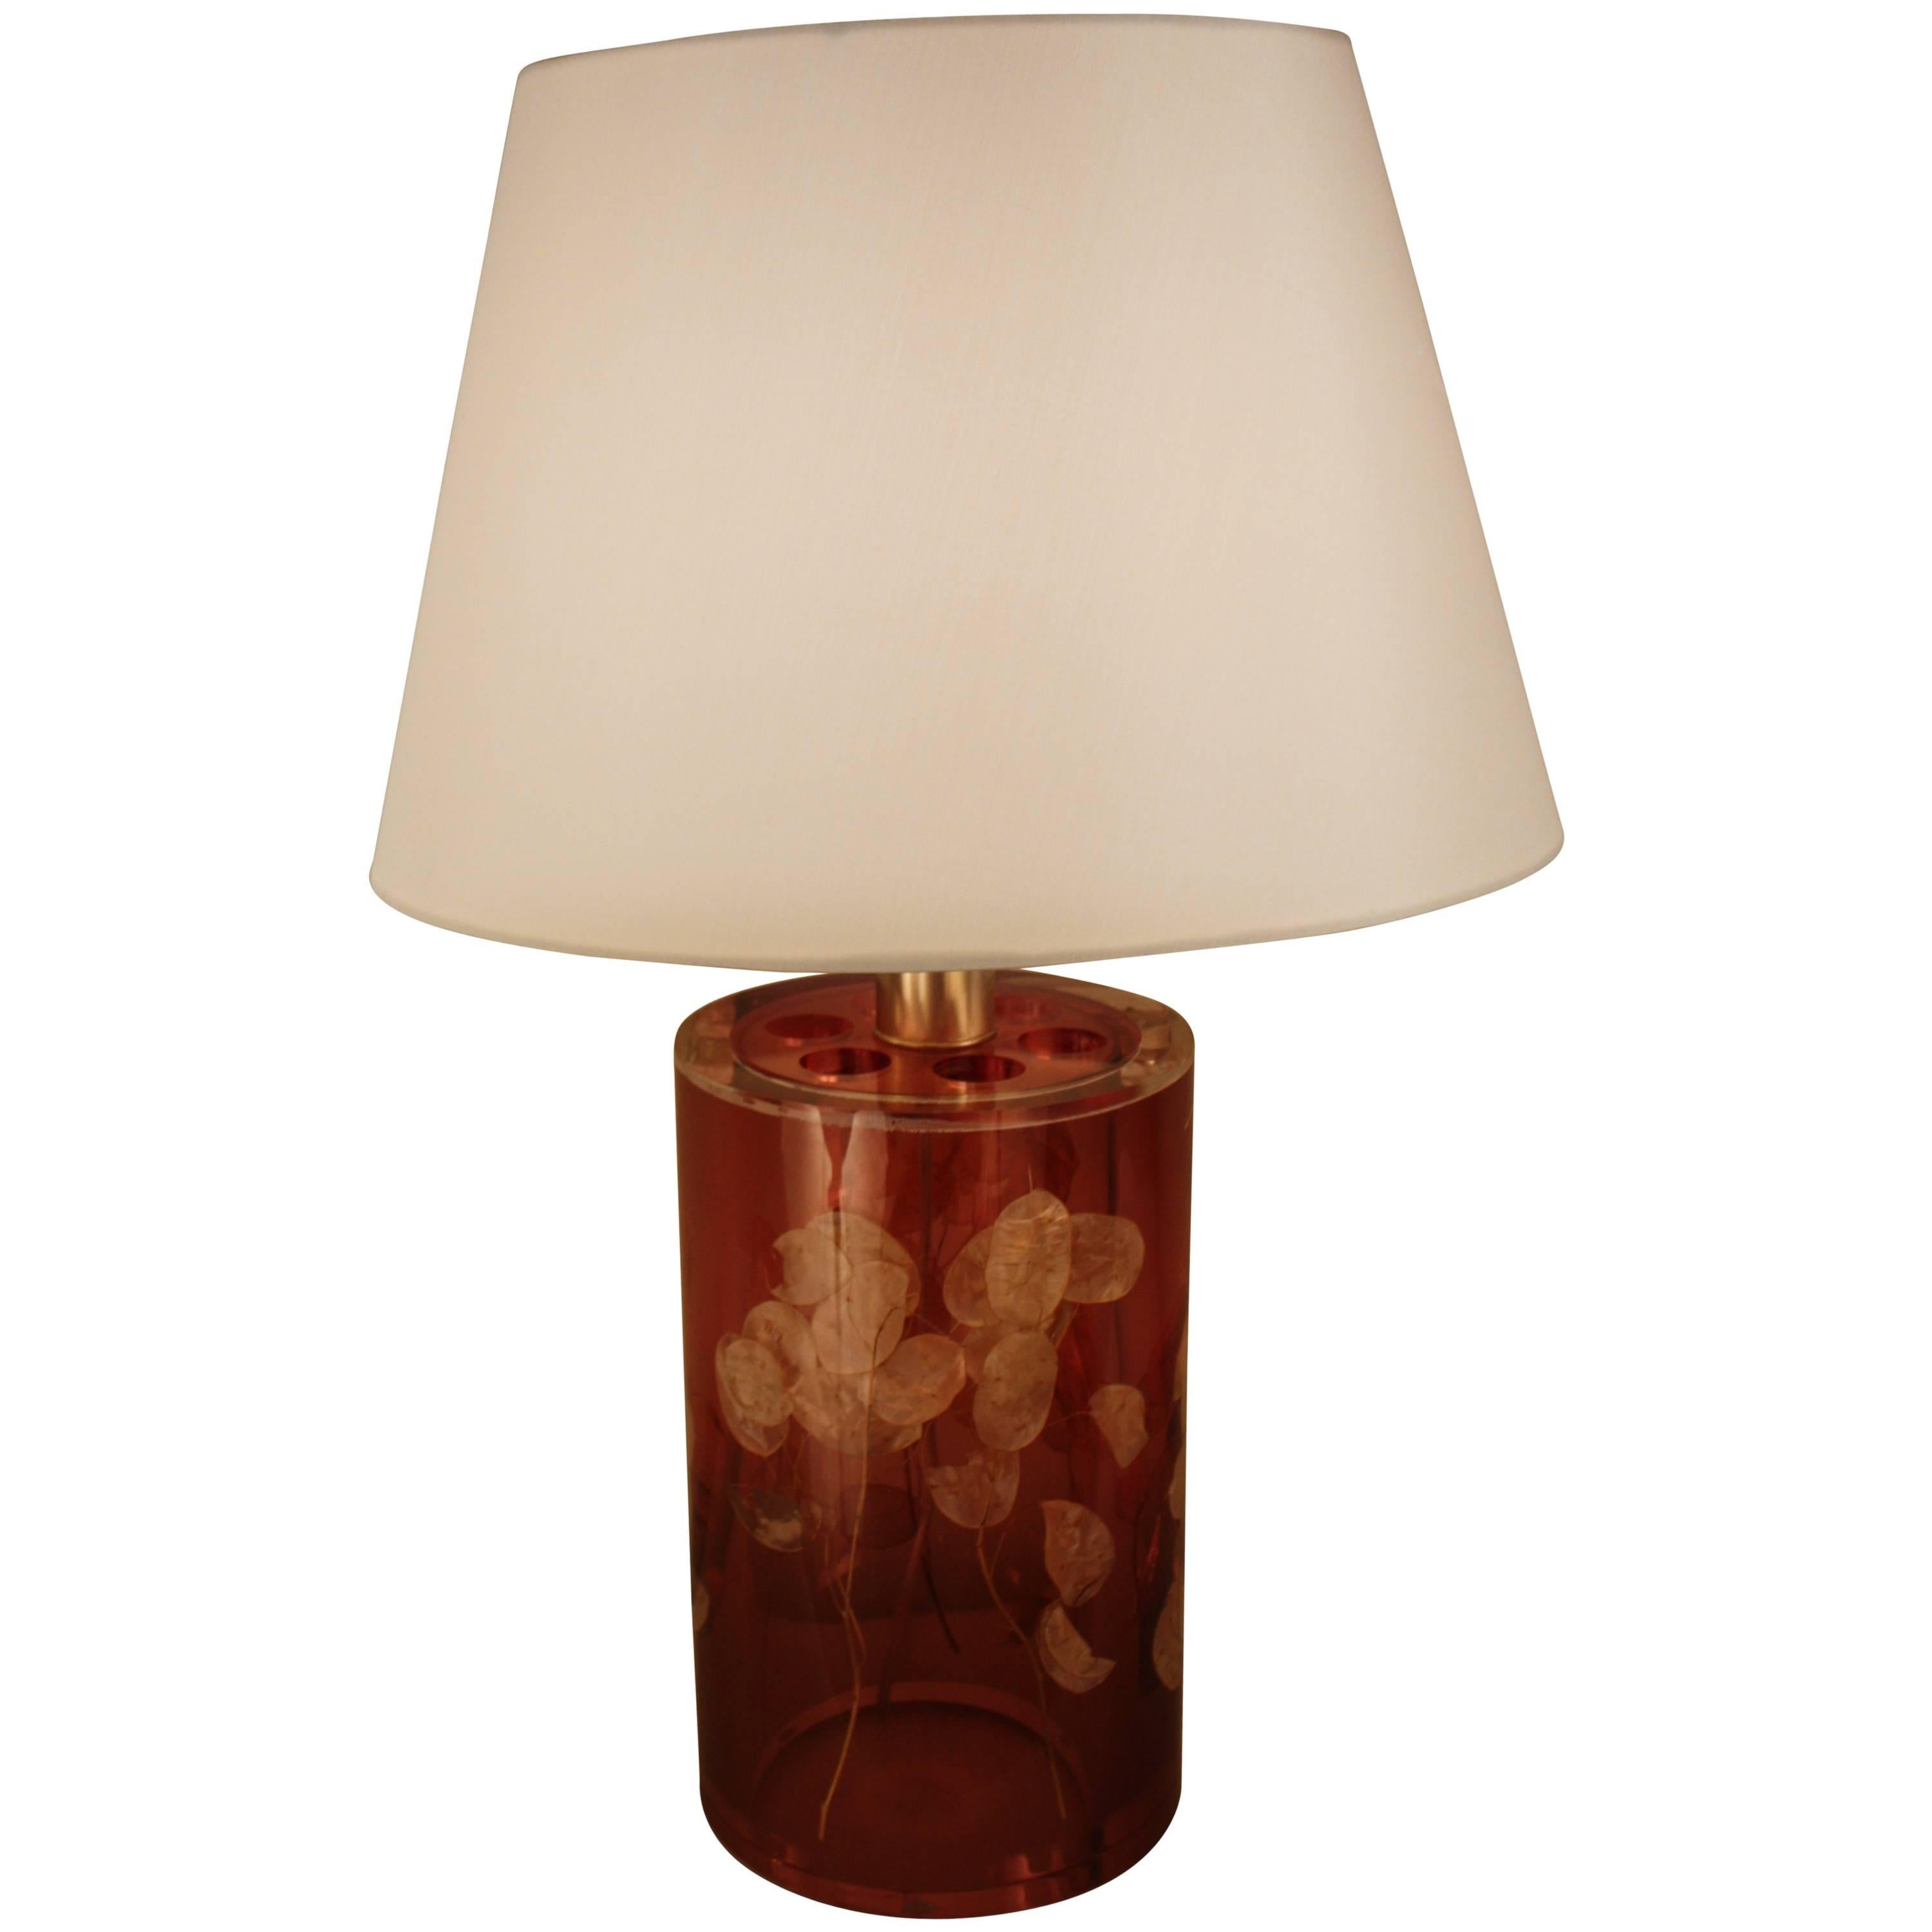 Lucite with Leaf Inclusion Table Lamp by Romeo Paris